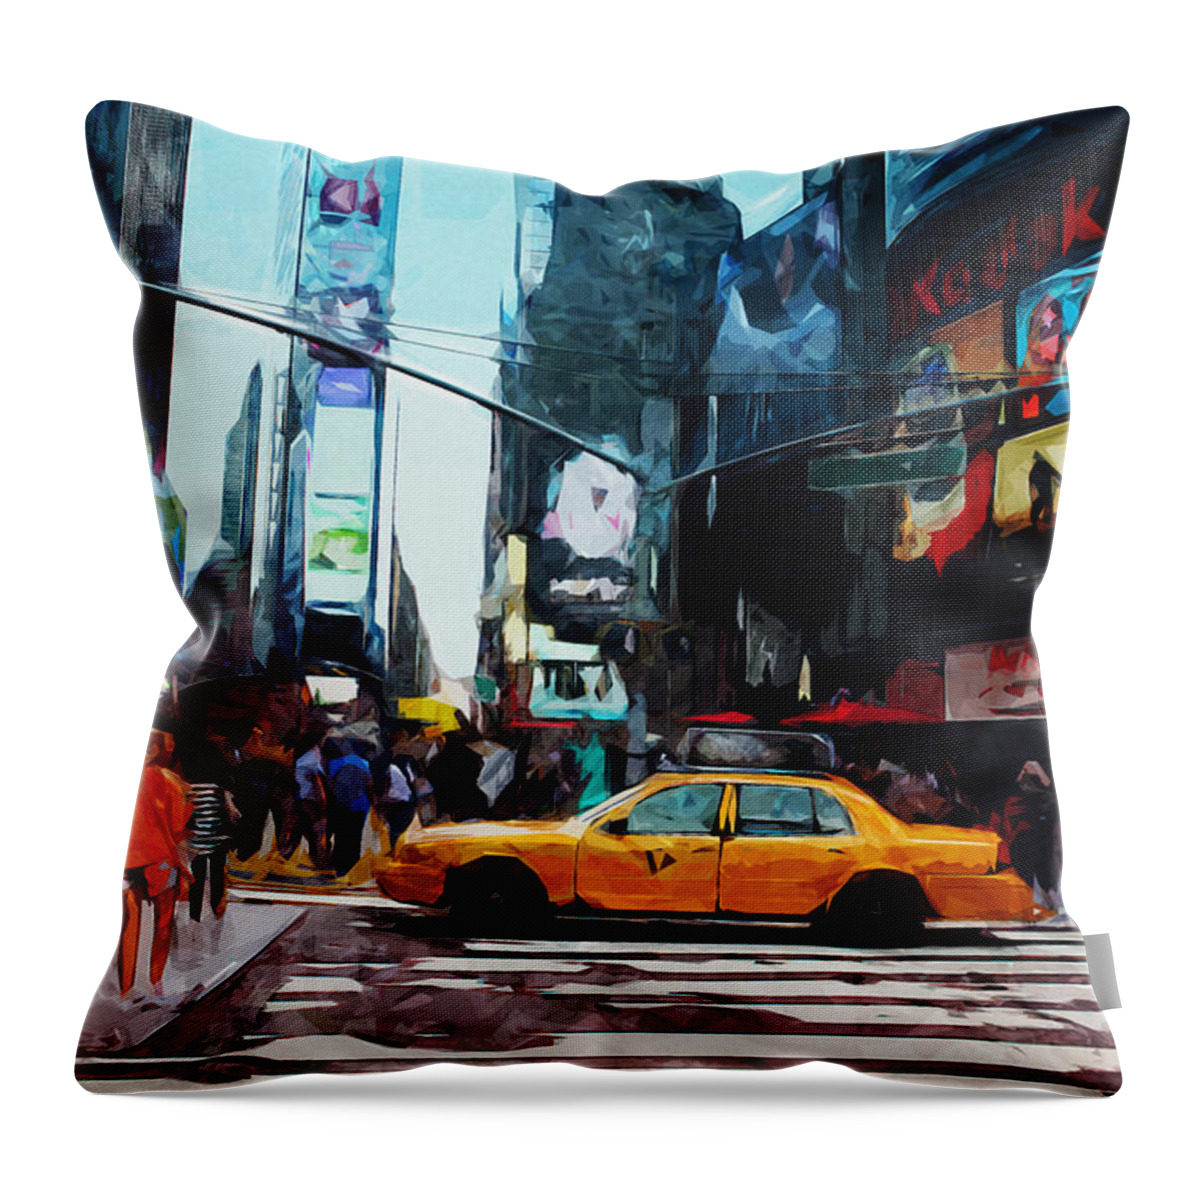 Times Square Throw Pillow featuring the digital art Times Square Taxi- Art by Linda Woods by Linda Woods